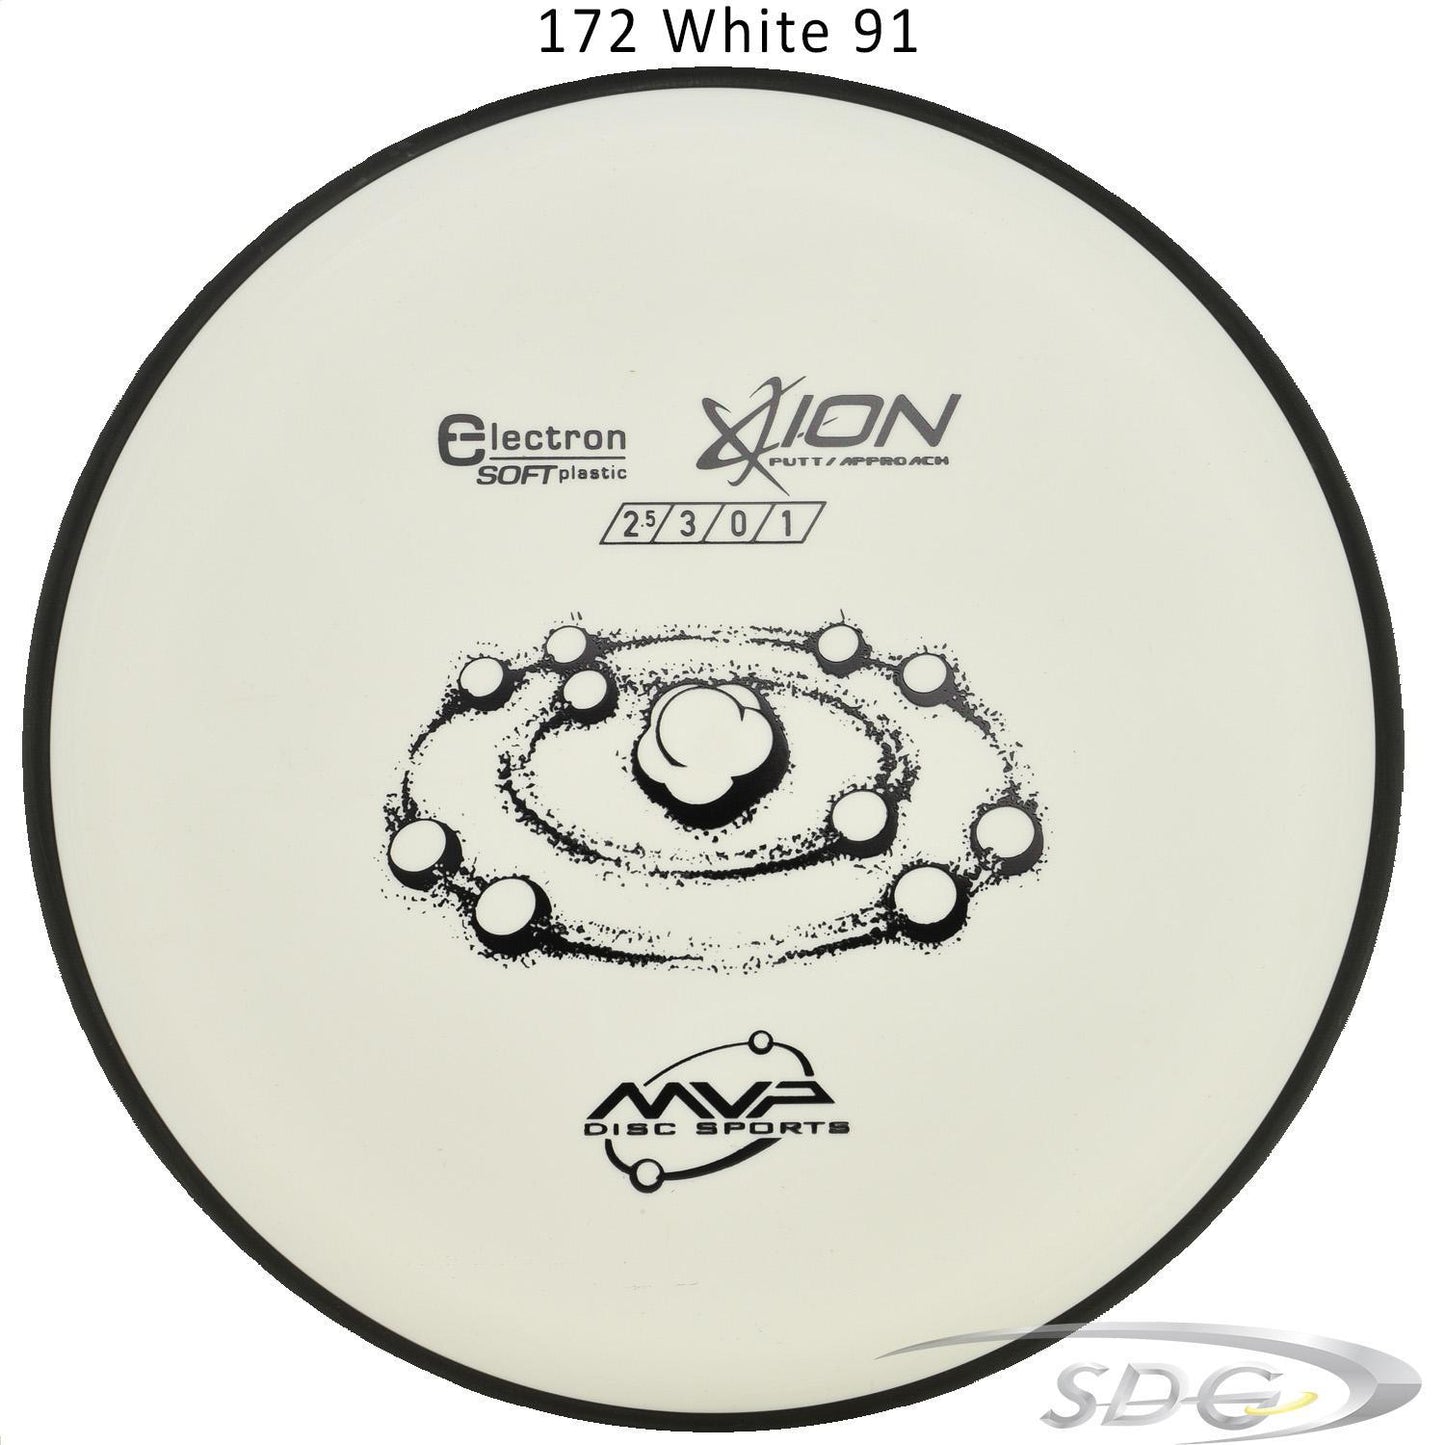 mvp-electron-ion-soft-disc-golf-putt-approach 172 White 91 